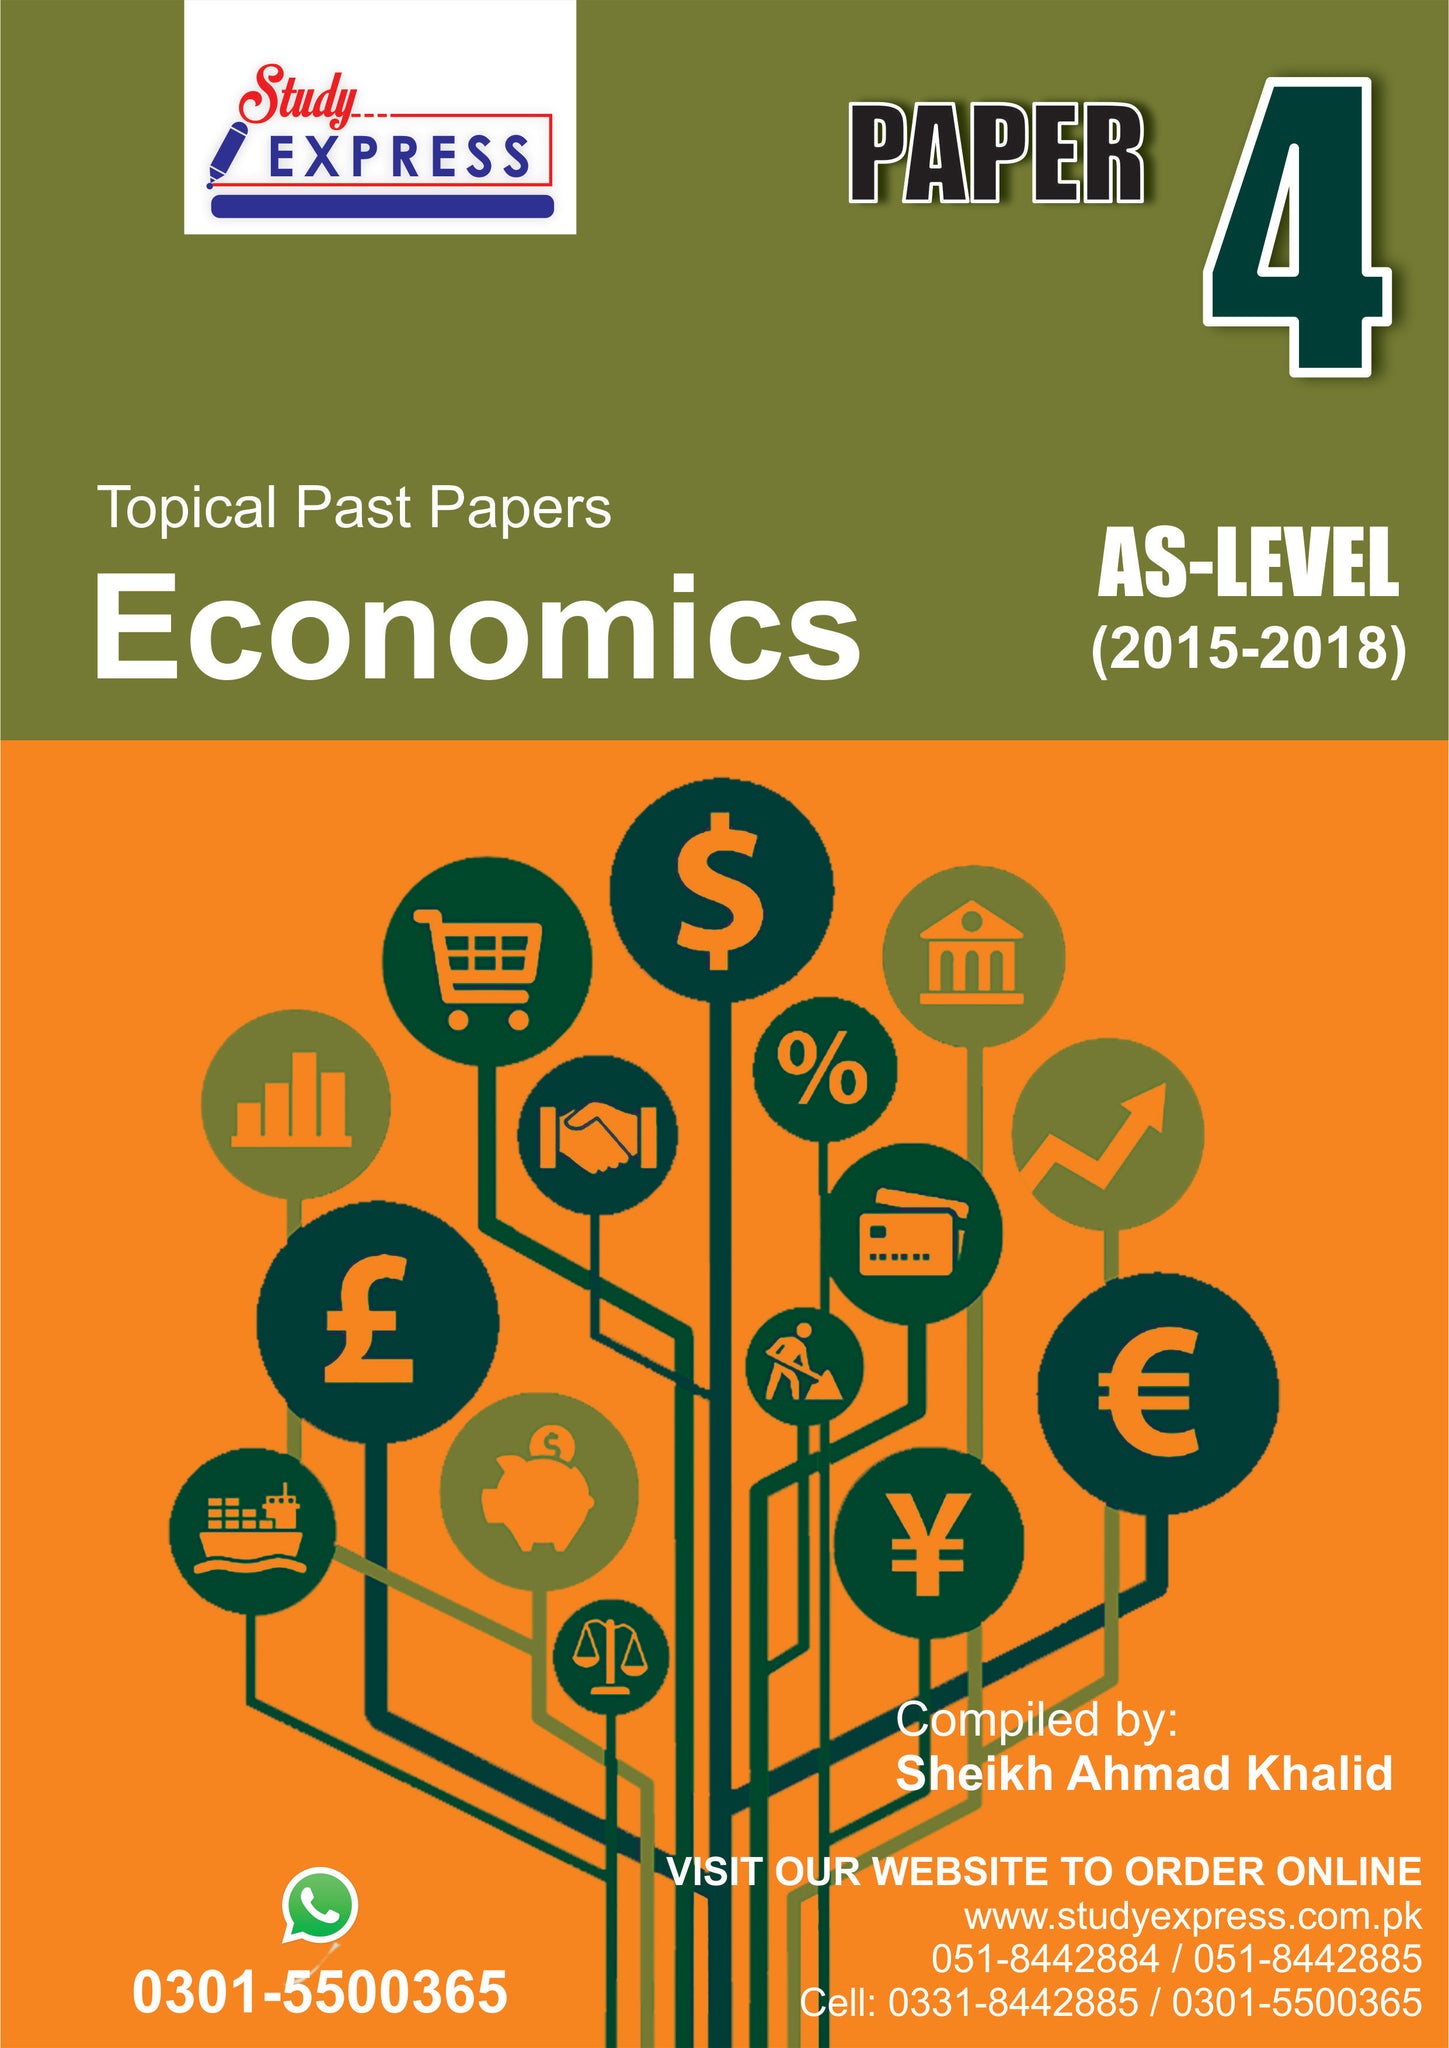 A 2-LEVEL TOPICAL ECONOMICS PAPER 4 (2015-2018) Compiled by: SHEIKH AHMAD KHALID